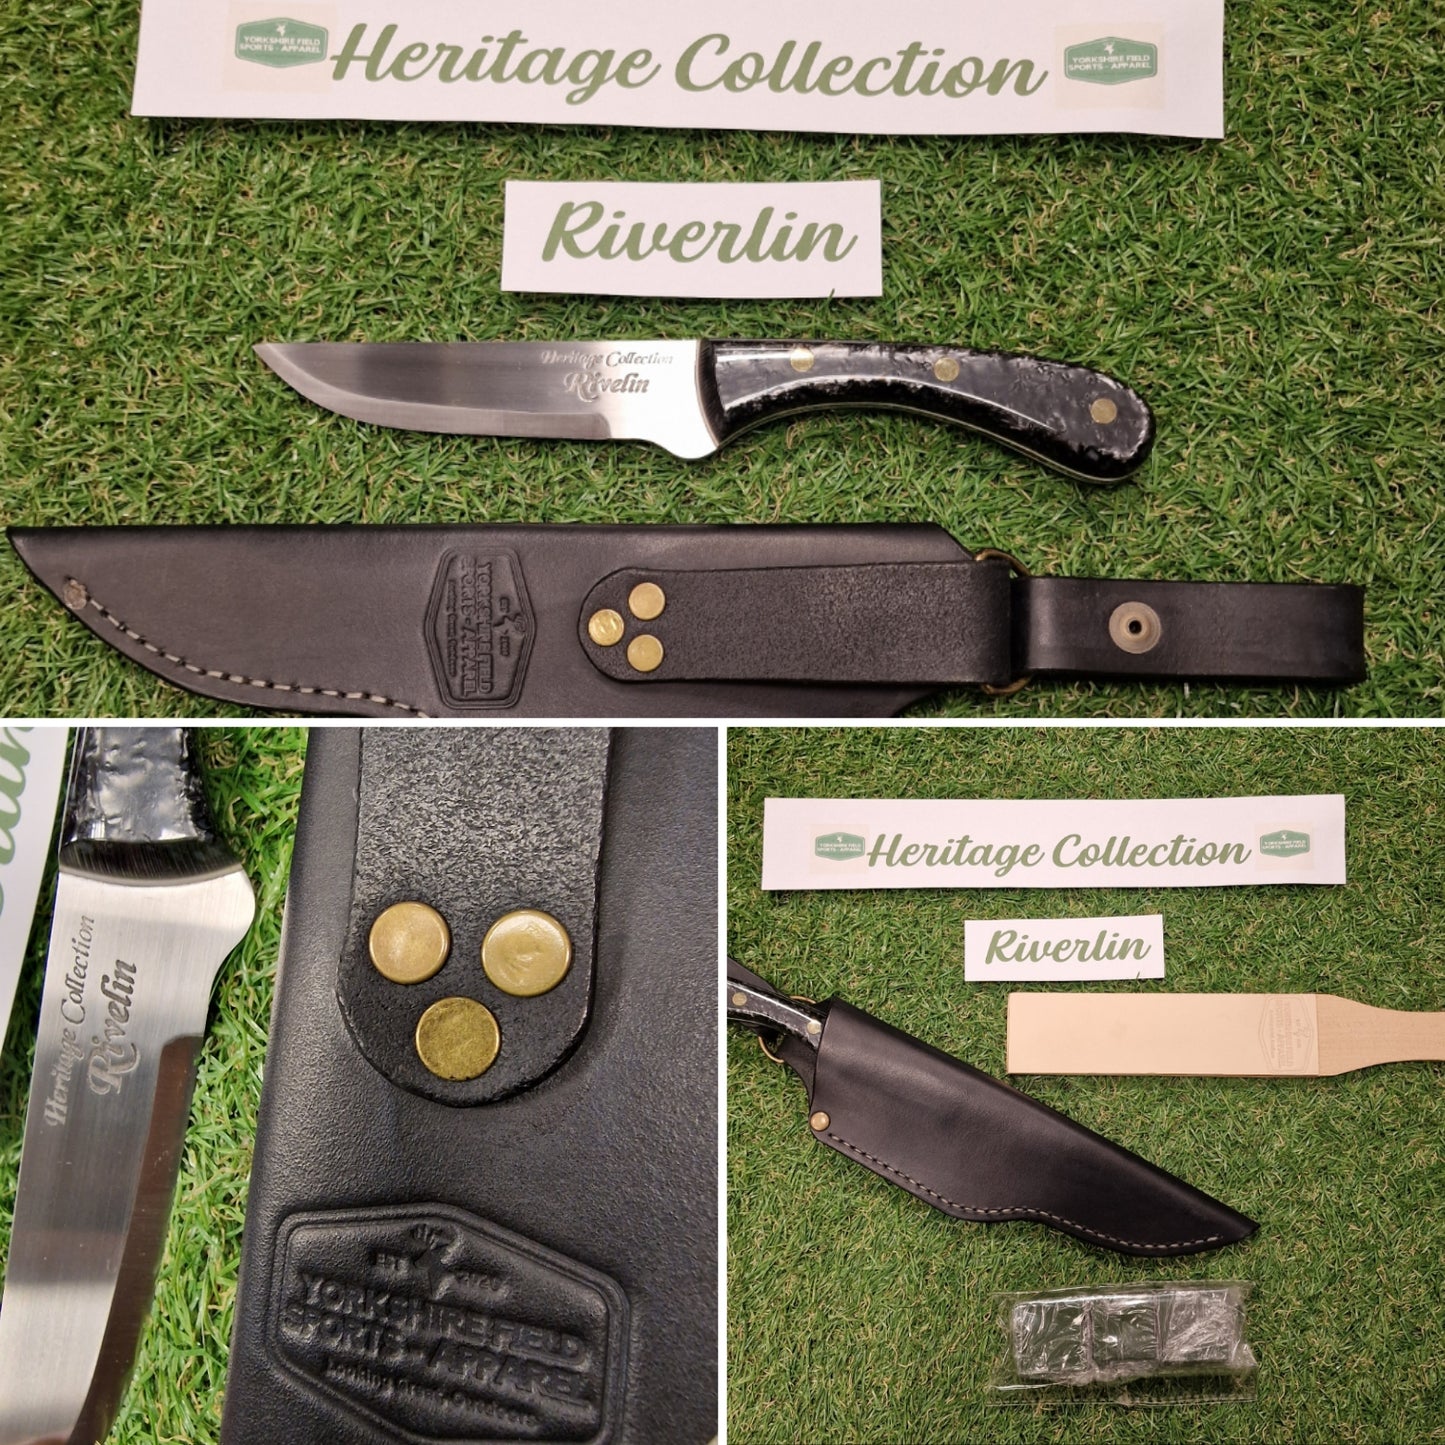 Yorkshire Field Sports-Apparel "Heritage Collection" Rivelin forged in Sheffield "ID MUST BE SENT PRIOR TO DESPATCH OVER 18s ONLY"